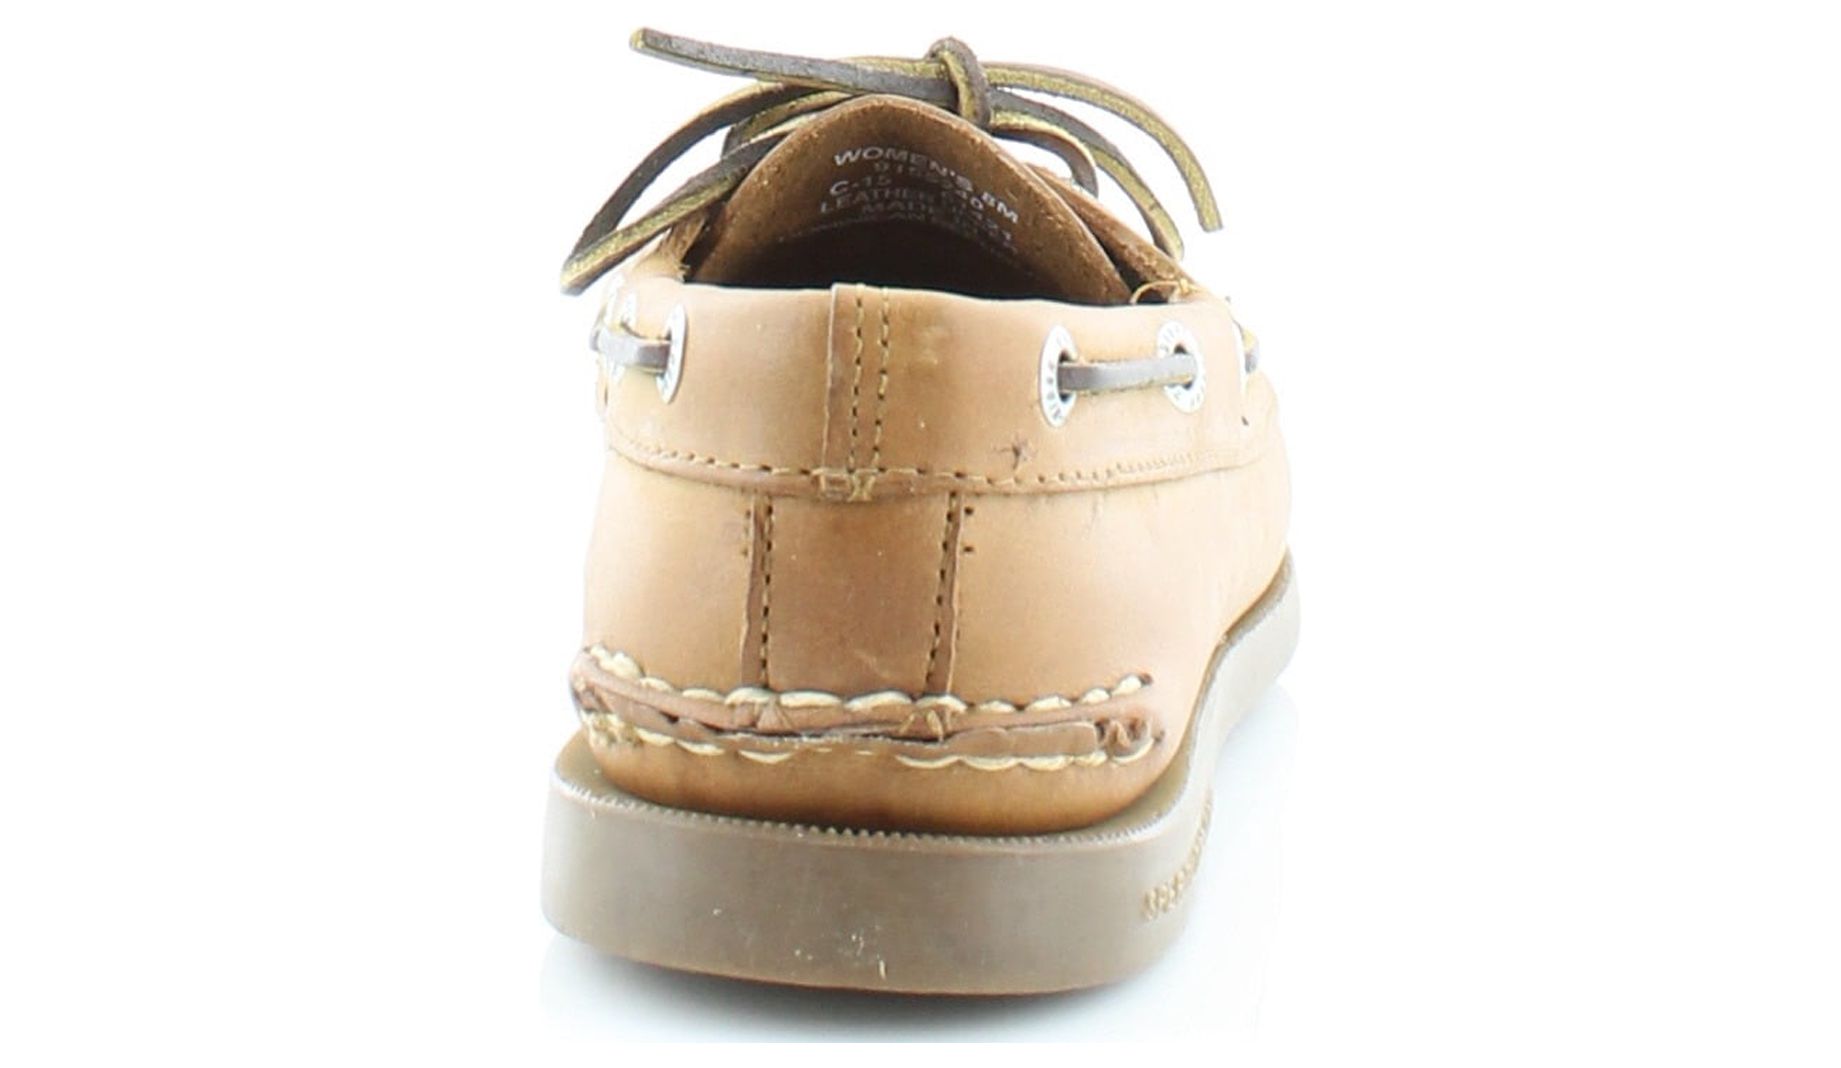 Sperry Top-Sider A/O 2-Eye Women's Loafers & Slip-Ons - image 4 of 5